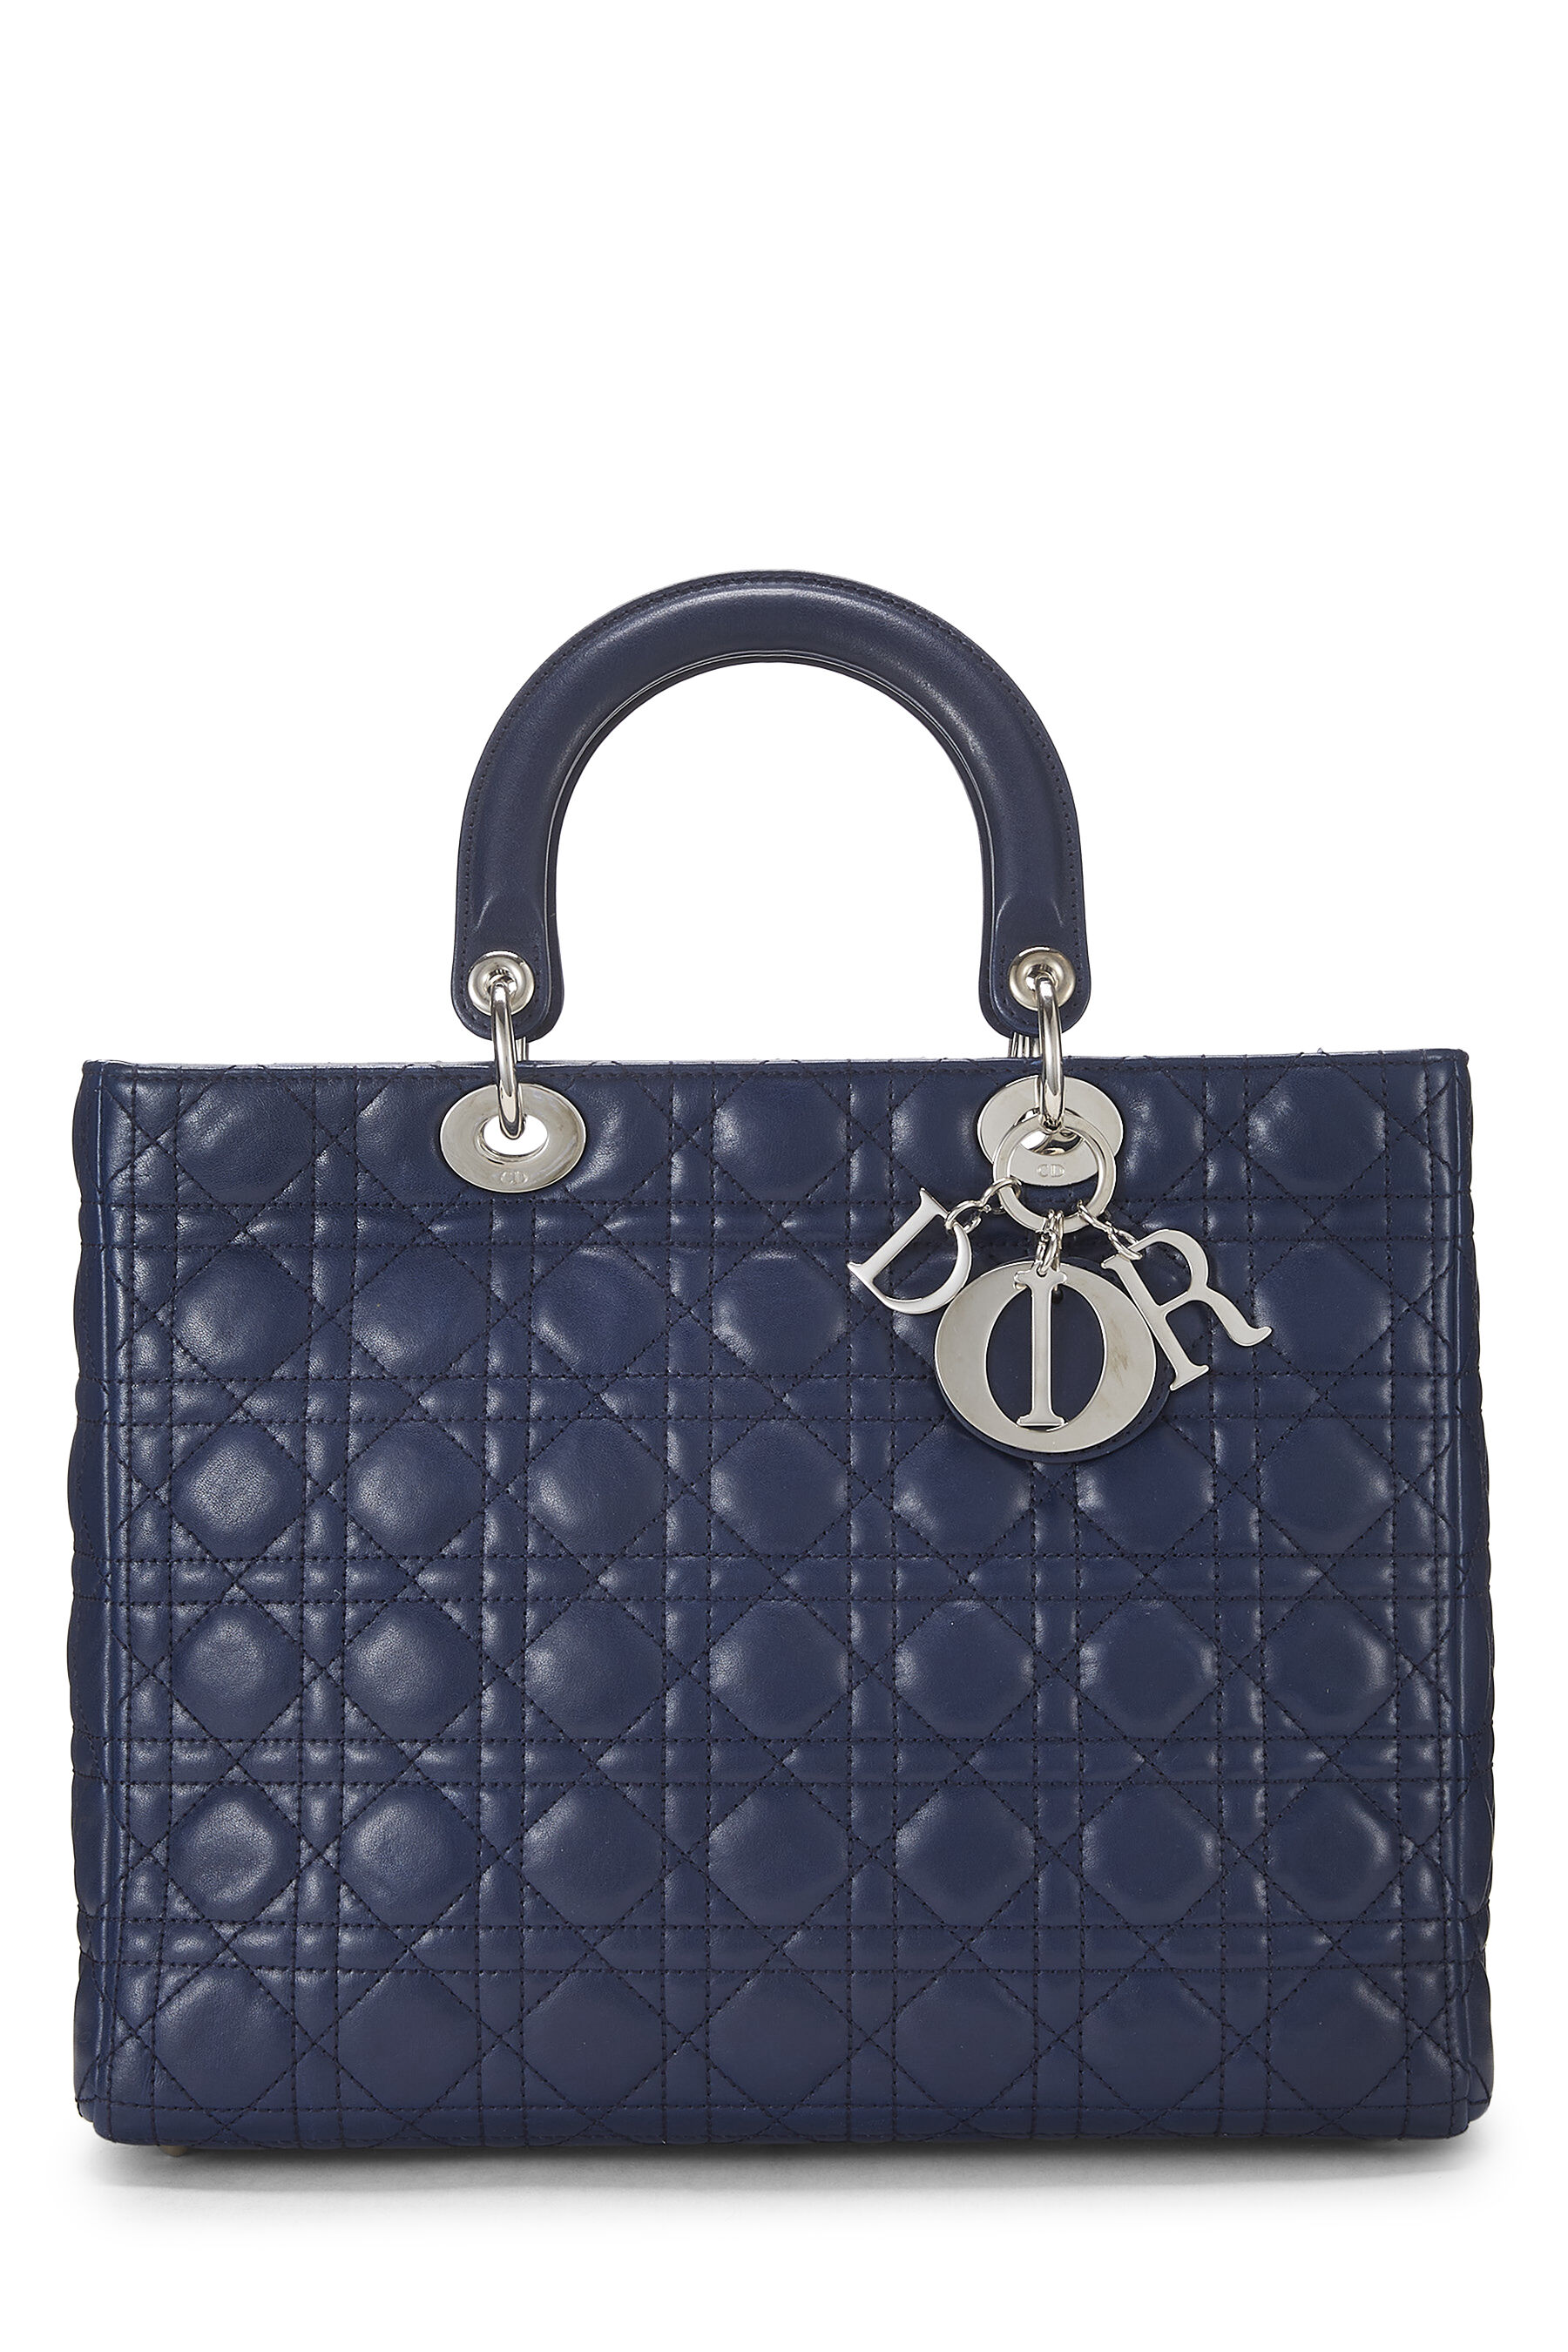 Blue Cannage Quilted Lambskin Lady Dior Dior Large